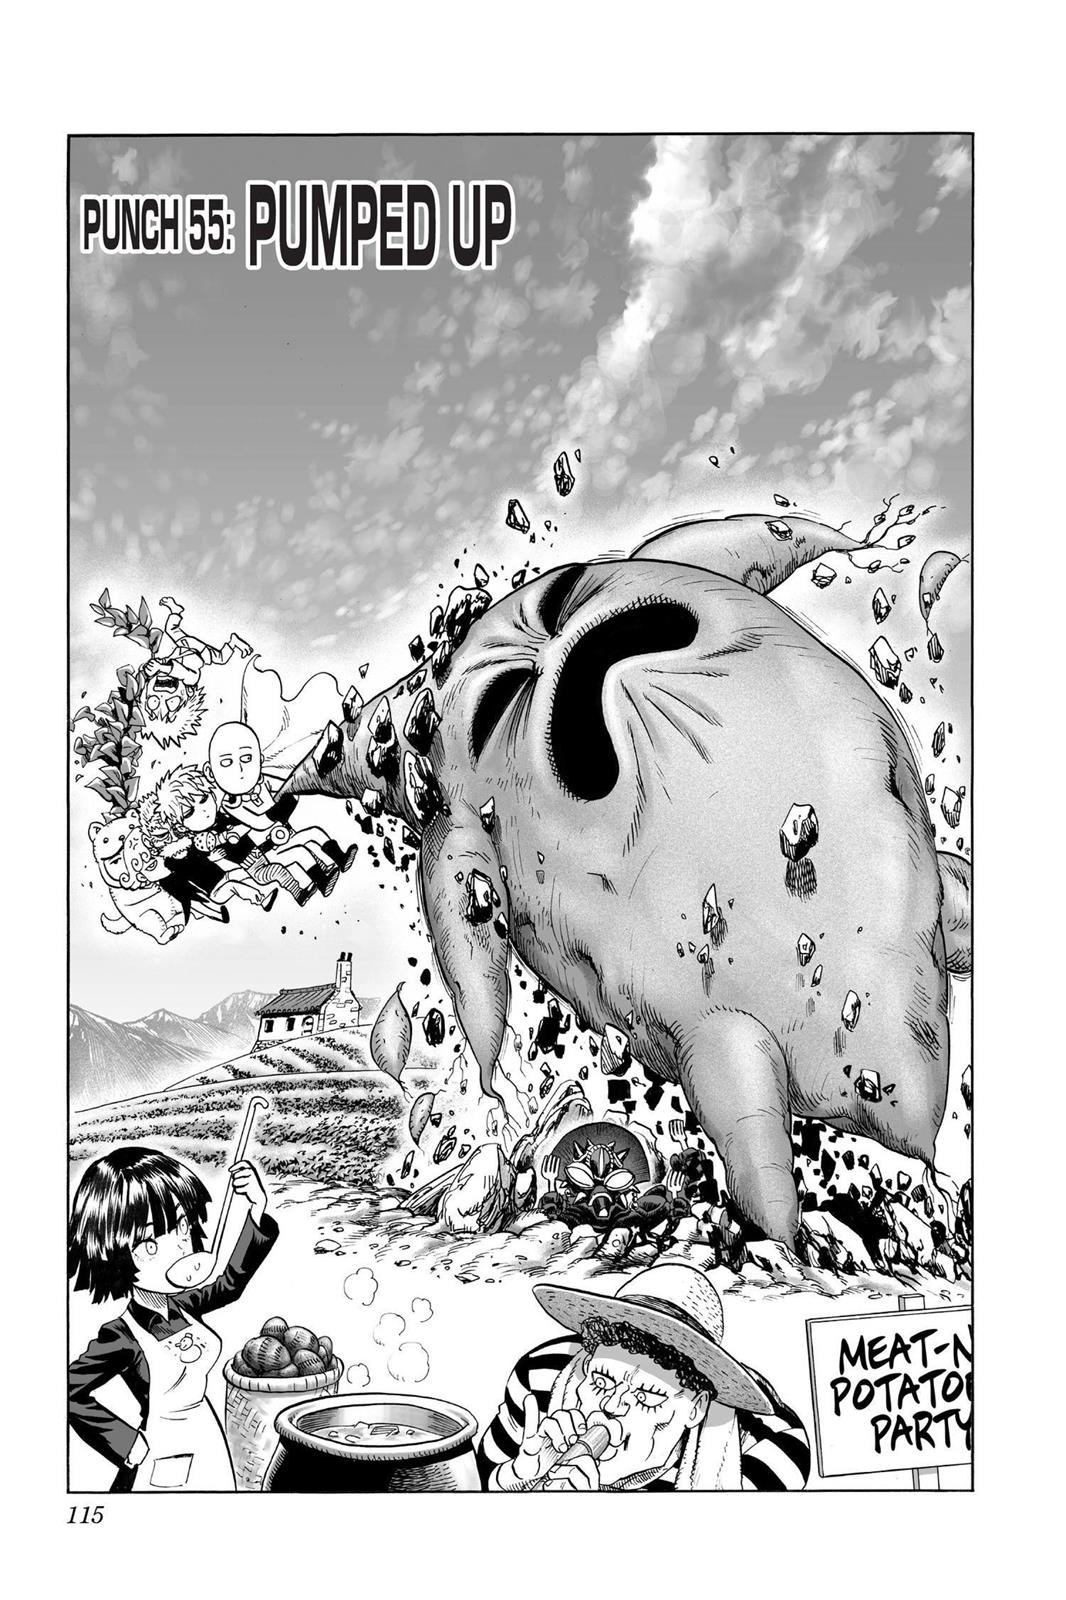 One-Punch Man, Punch 55 image 01